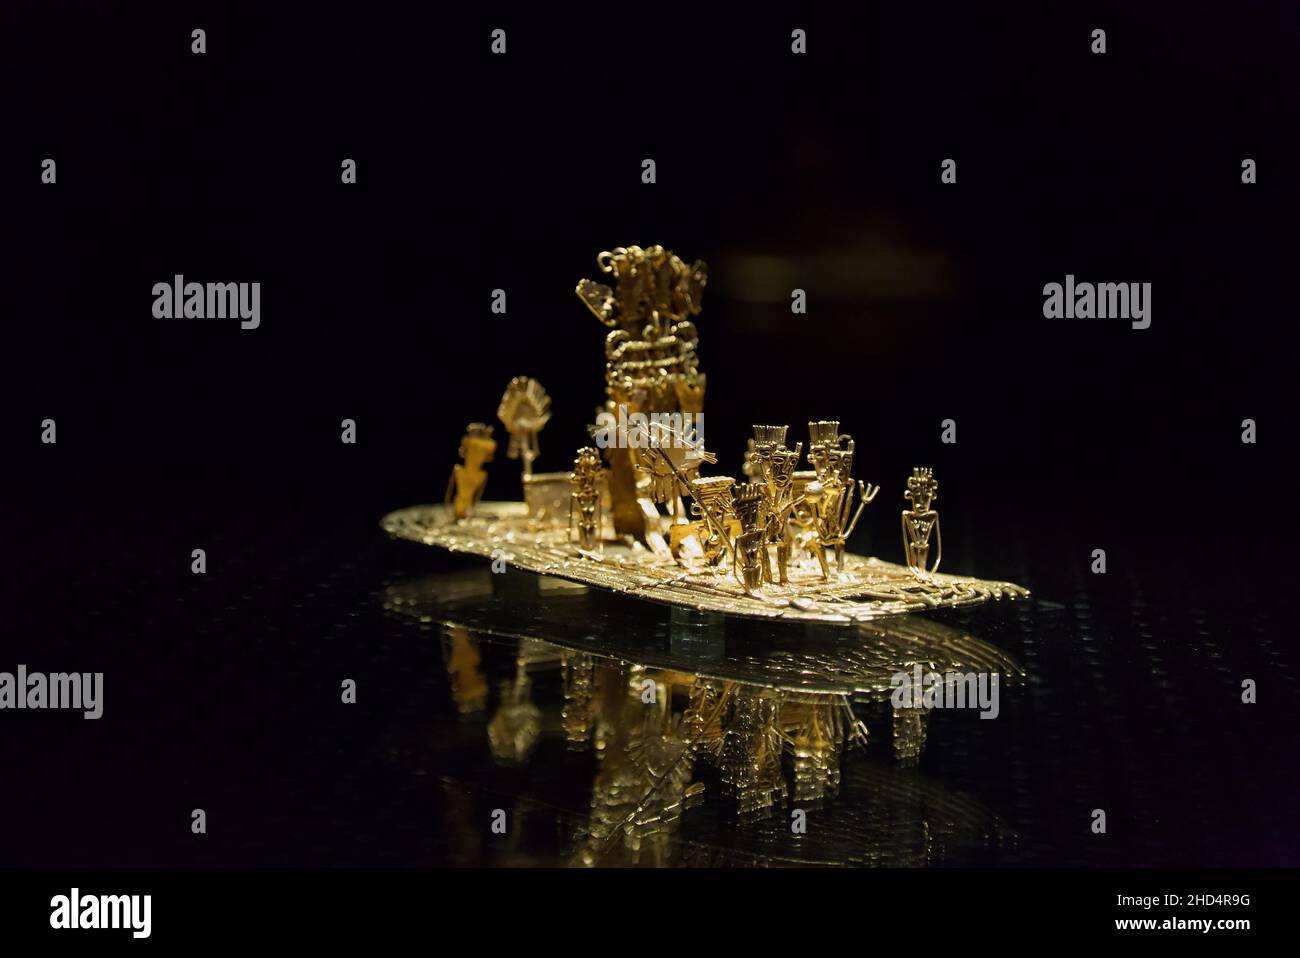 Selective focus shot of Muisca raft on display in the Gold Museum in the city of Bogota, Colombia Stock Photo